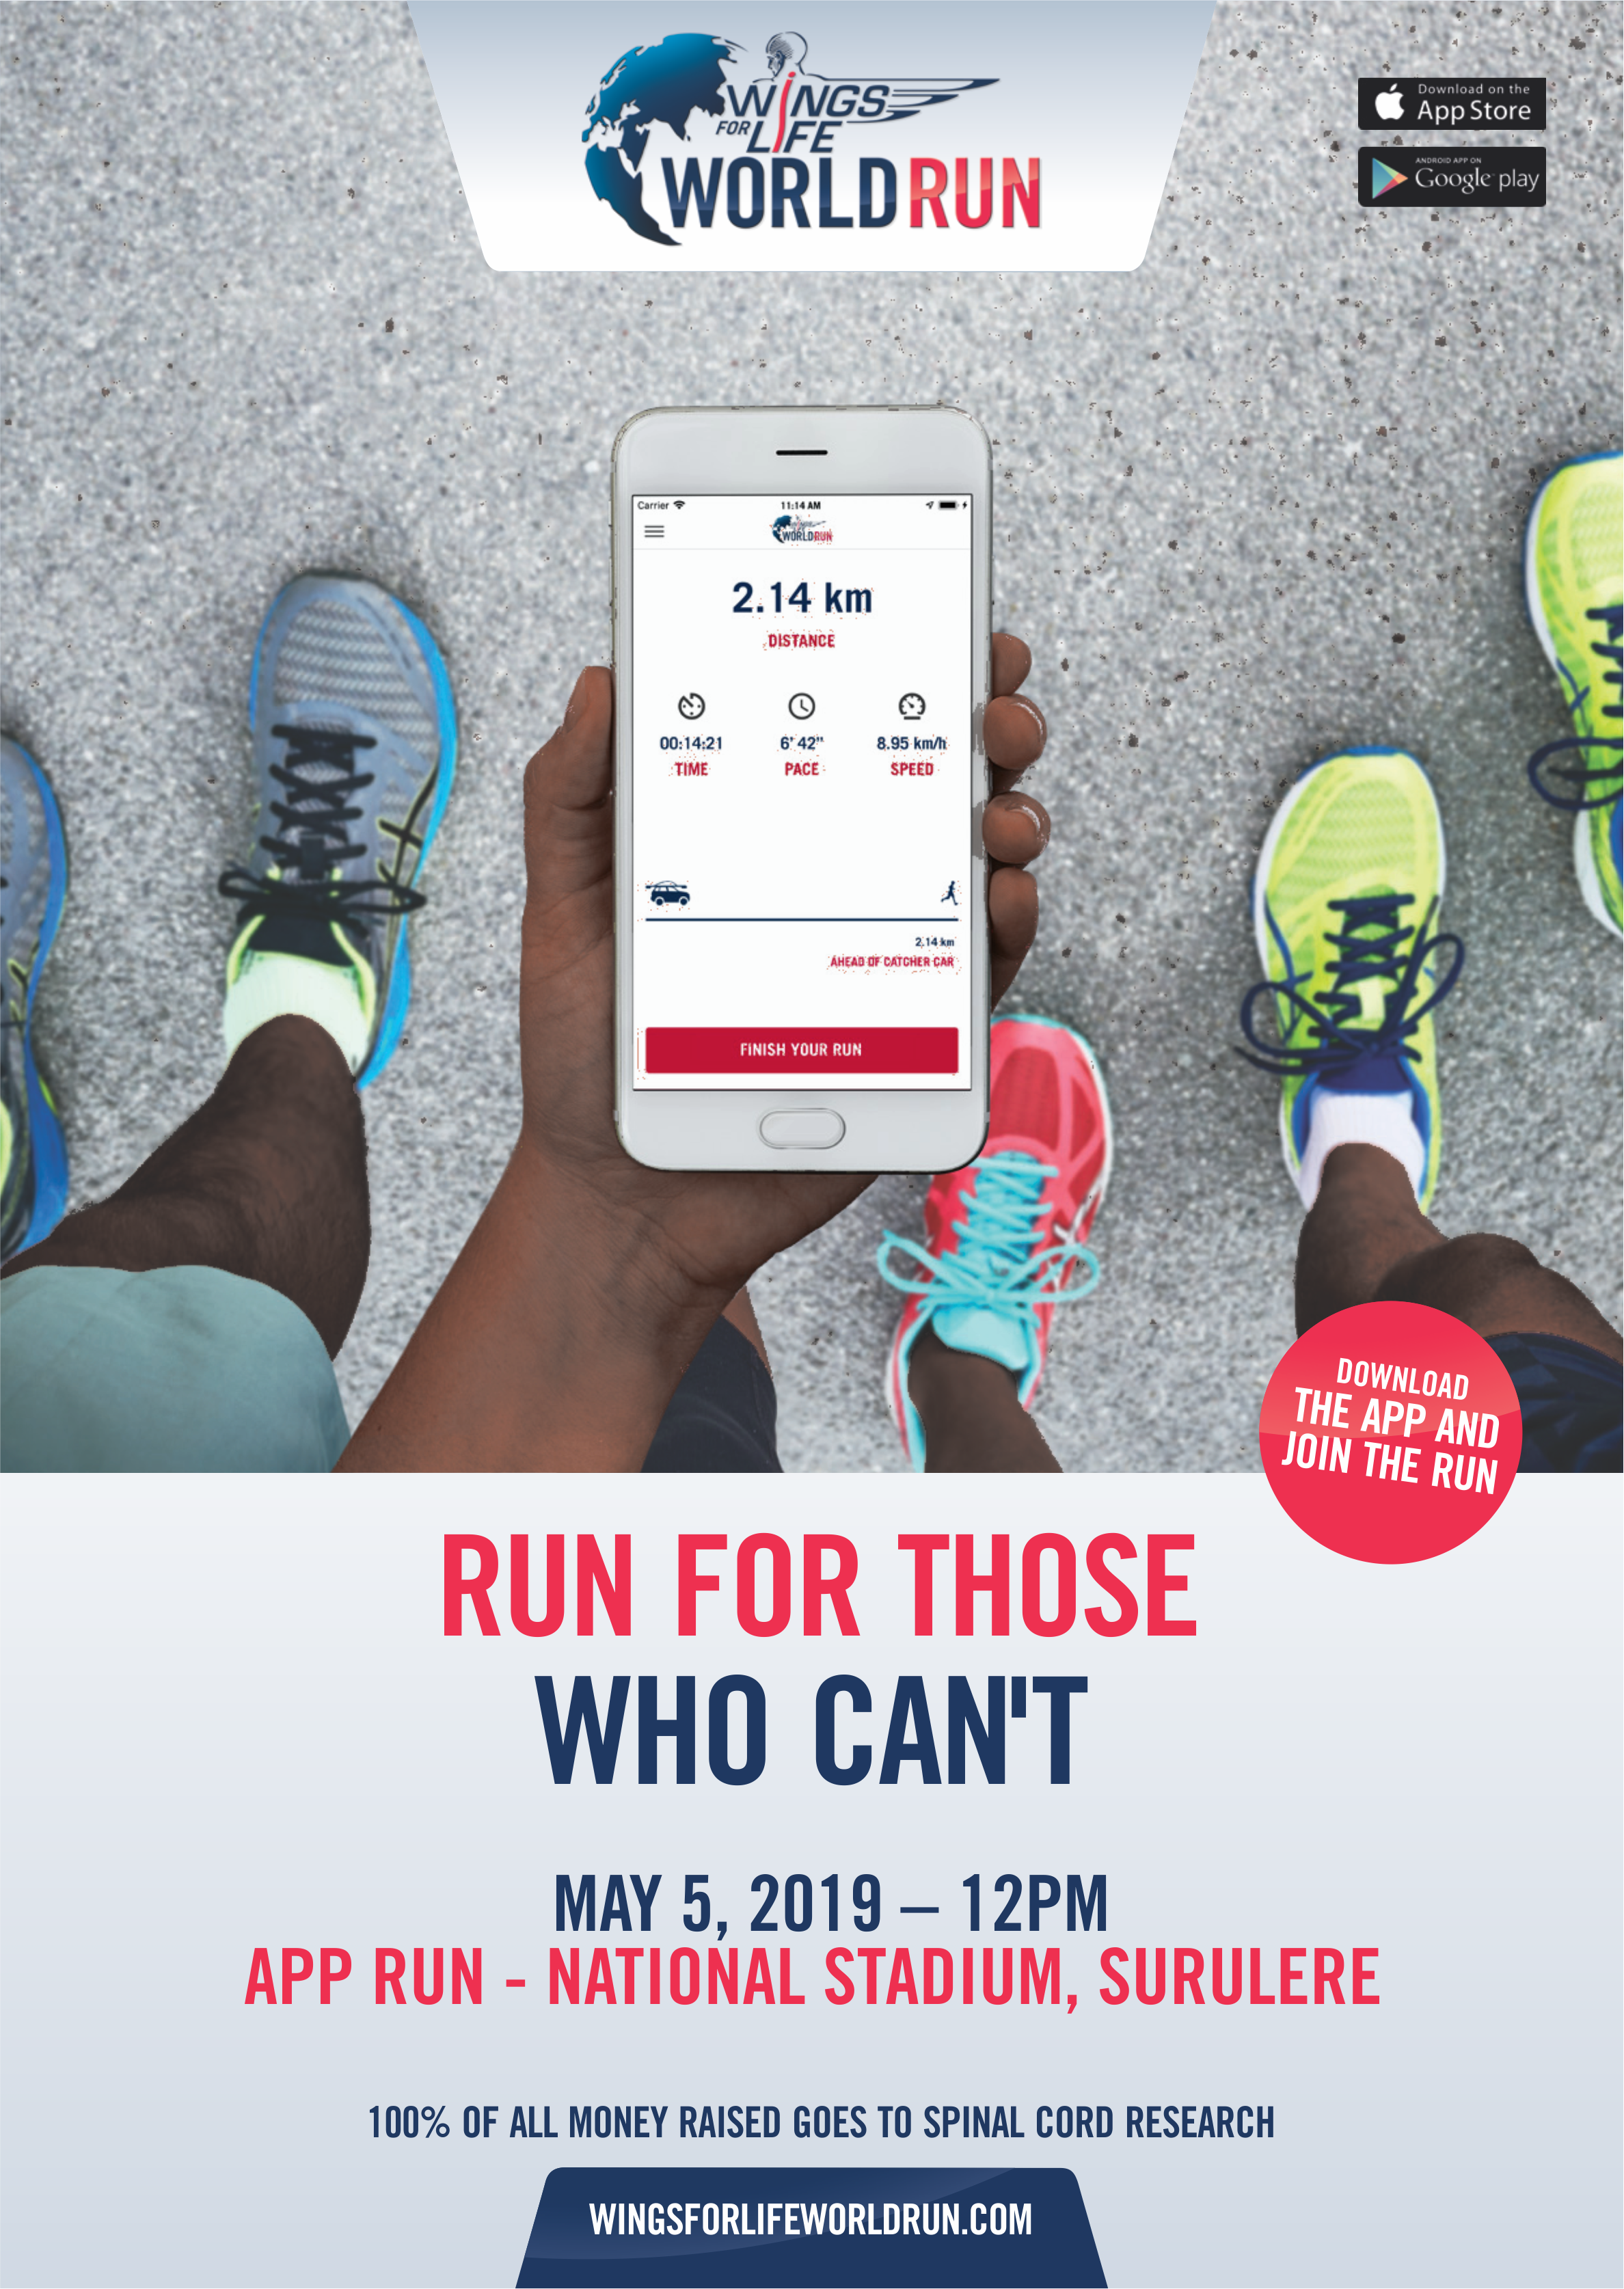 RedBull brings ‘Wings for Life World Run’ charity to Lagos